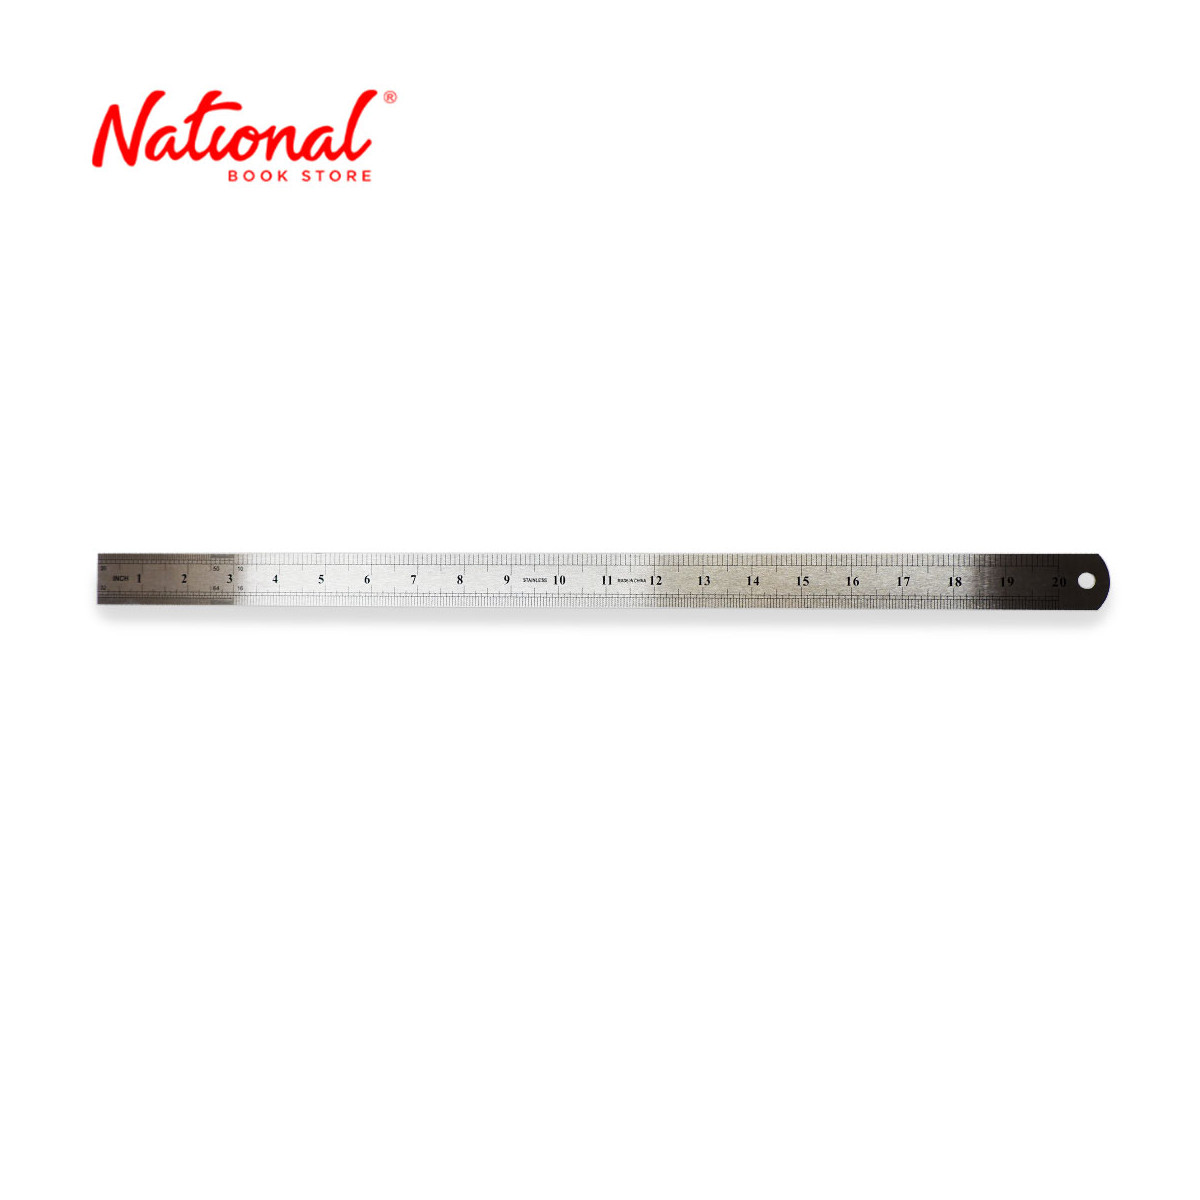 Steel Ruler 20 inches JSH 0750 - School & Office Supplies